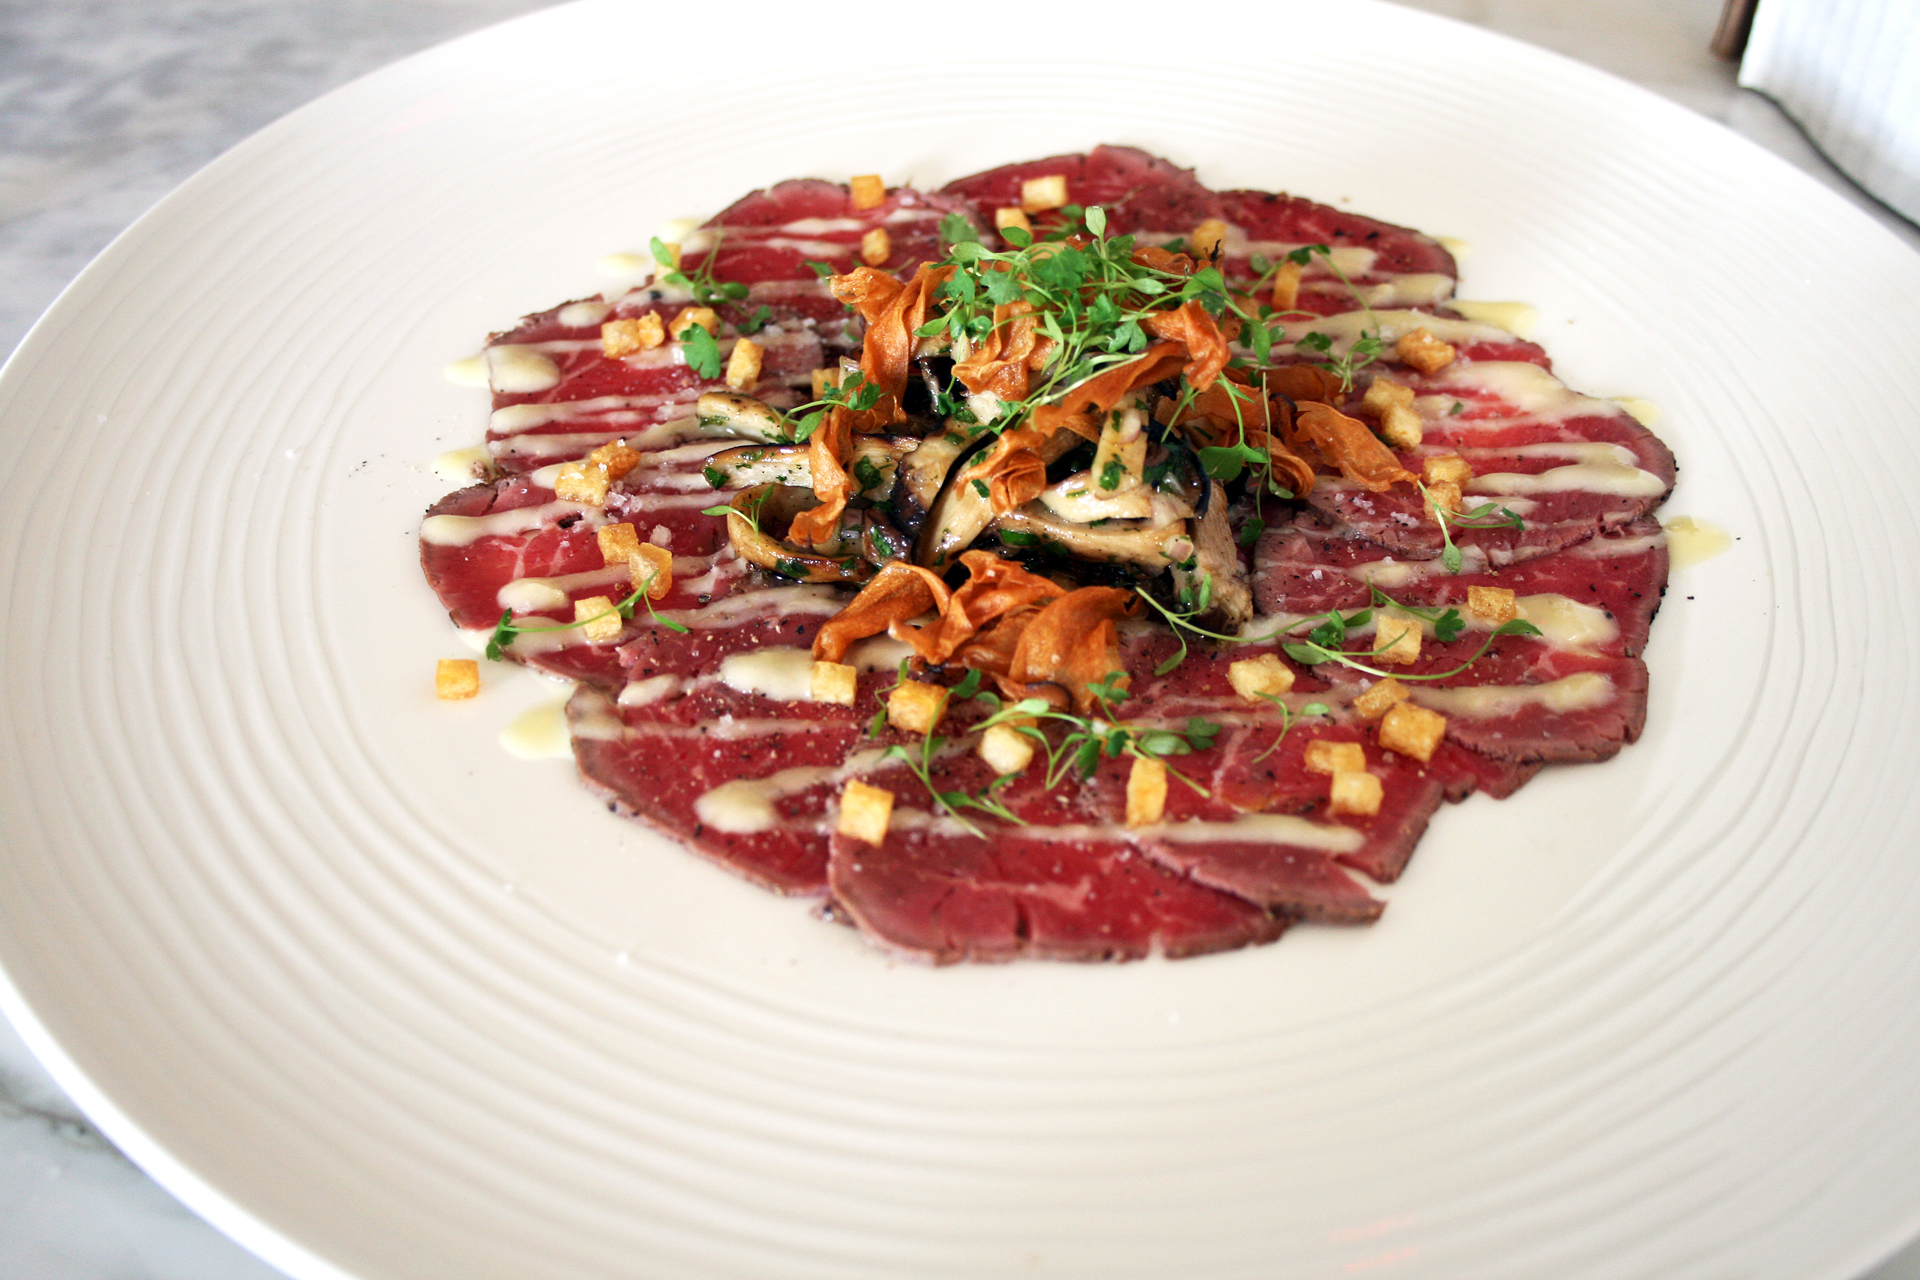 Beef Carpaccio — meltingly fatty, perfectly sliced and topped with sauteed trumpet mushrooms.